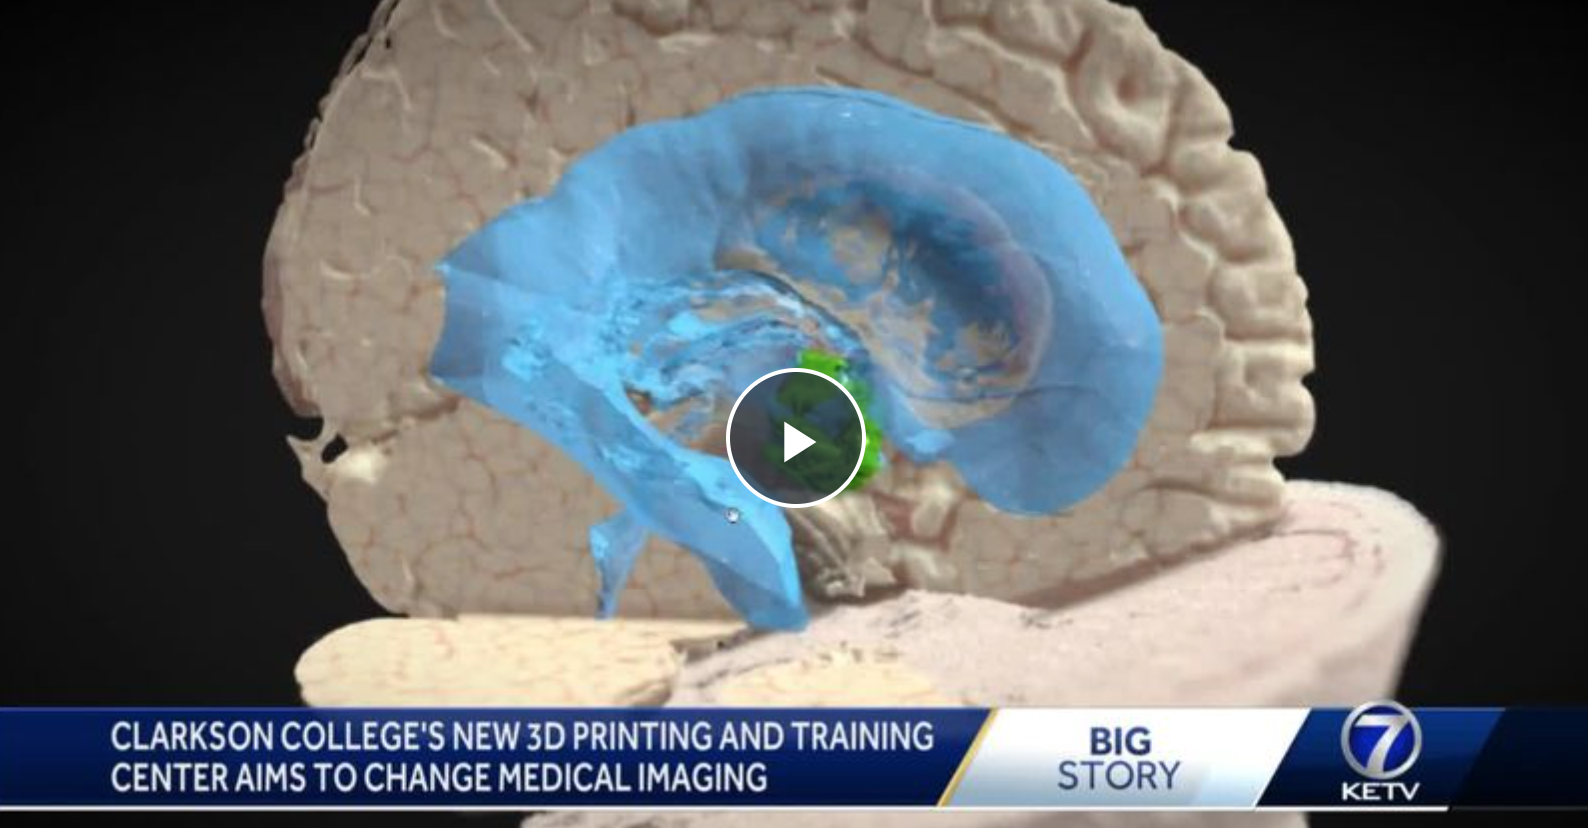 KETV Highlights 3D Printing and Training Center at Clarkson College